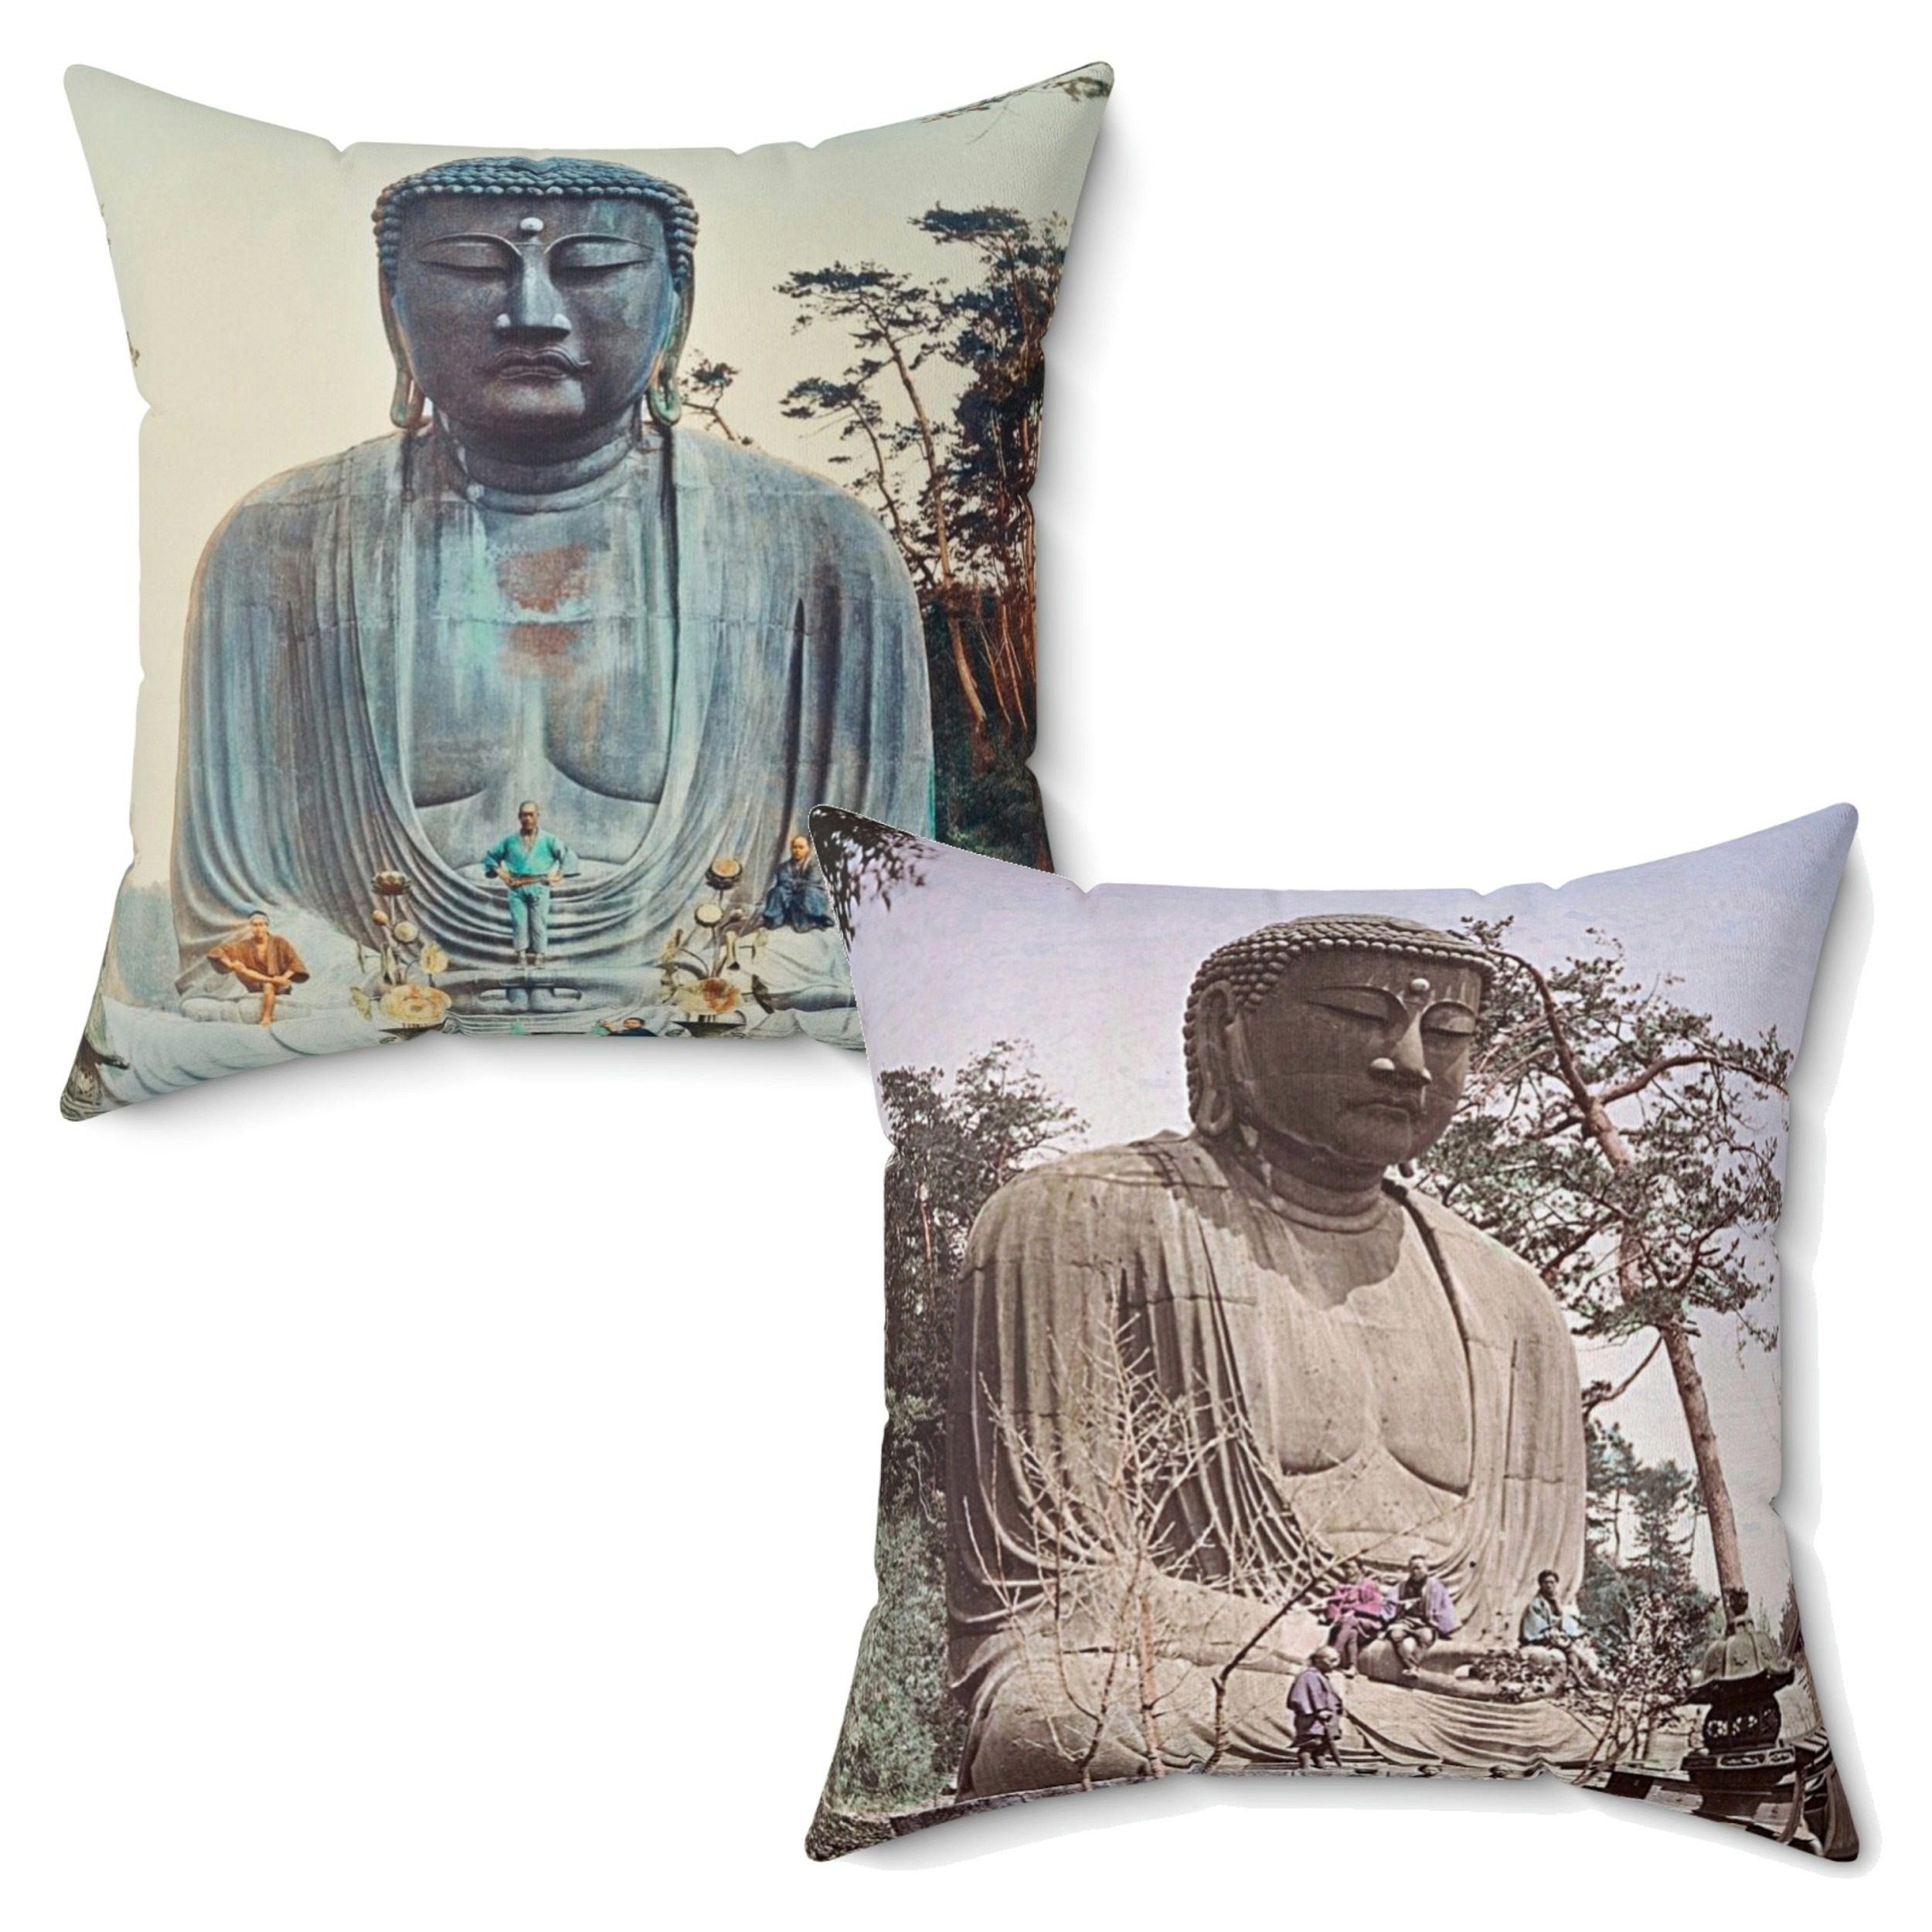 Buddha Two in One Throw Pillow